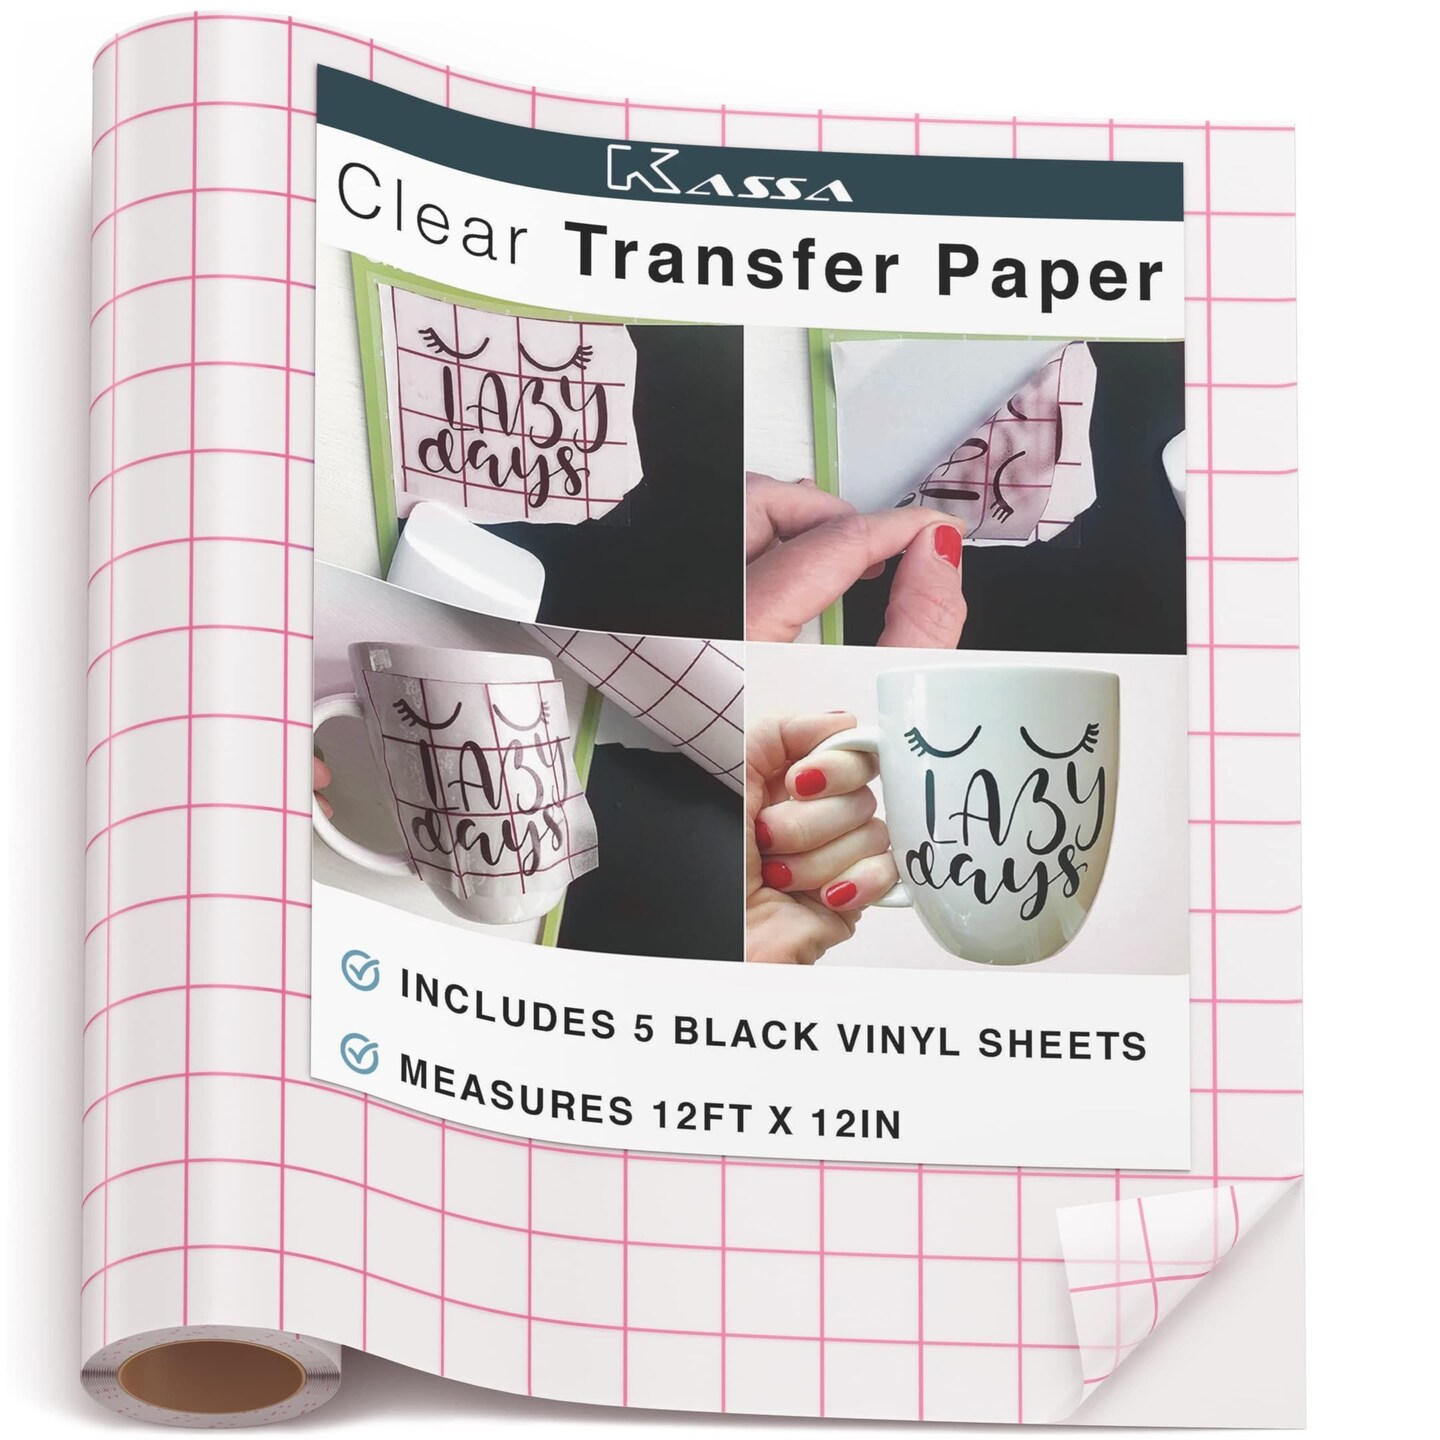 Kassa Transfer Tape Roll for Vinyl - Clear | 12 in x 12 ft, 5 Black Vinyl Sheets Included | Compatible with Cricut, Silhouette &#x26; Other Cutting Machines | For DIY Art Projects, Styling &#x26; Decorating